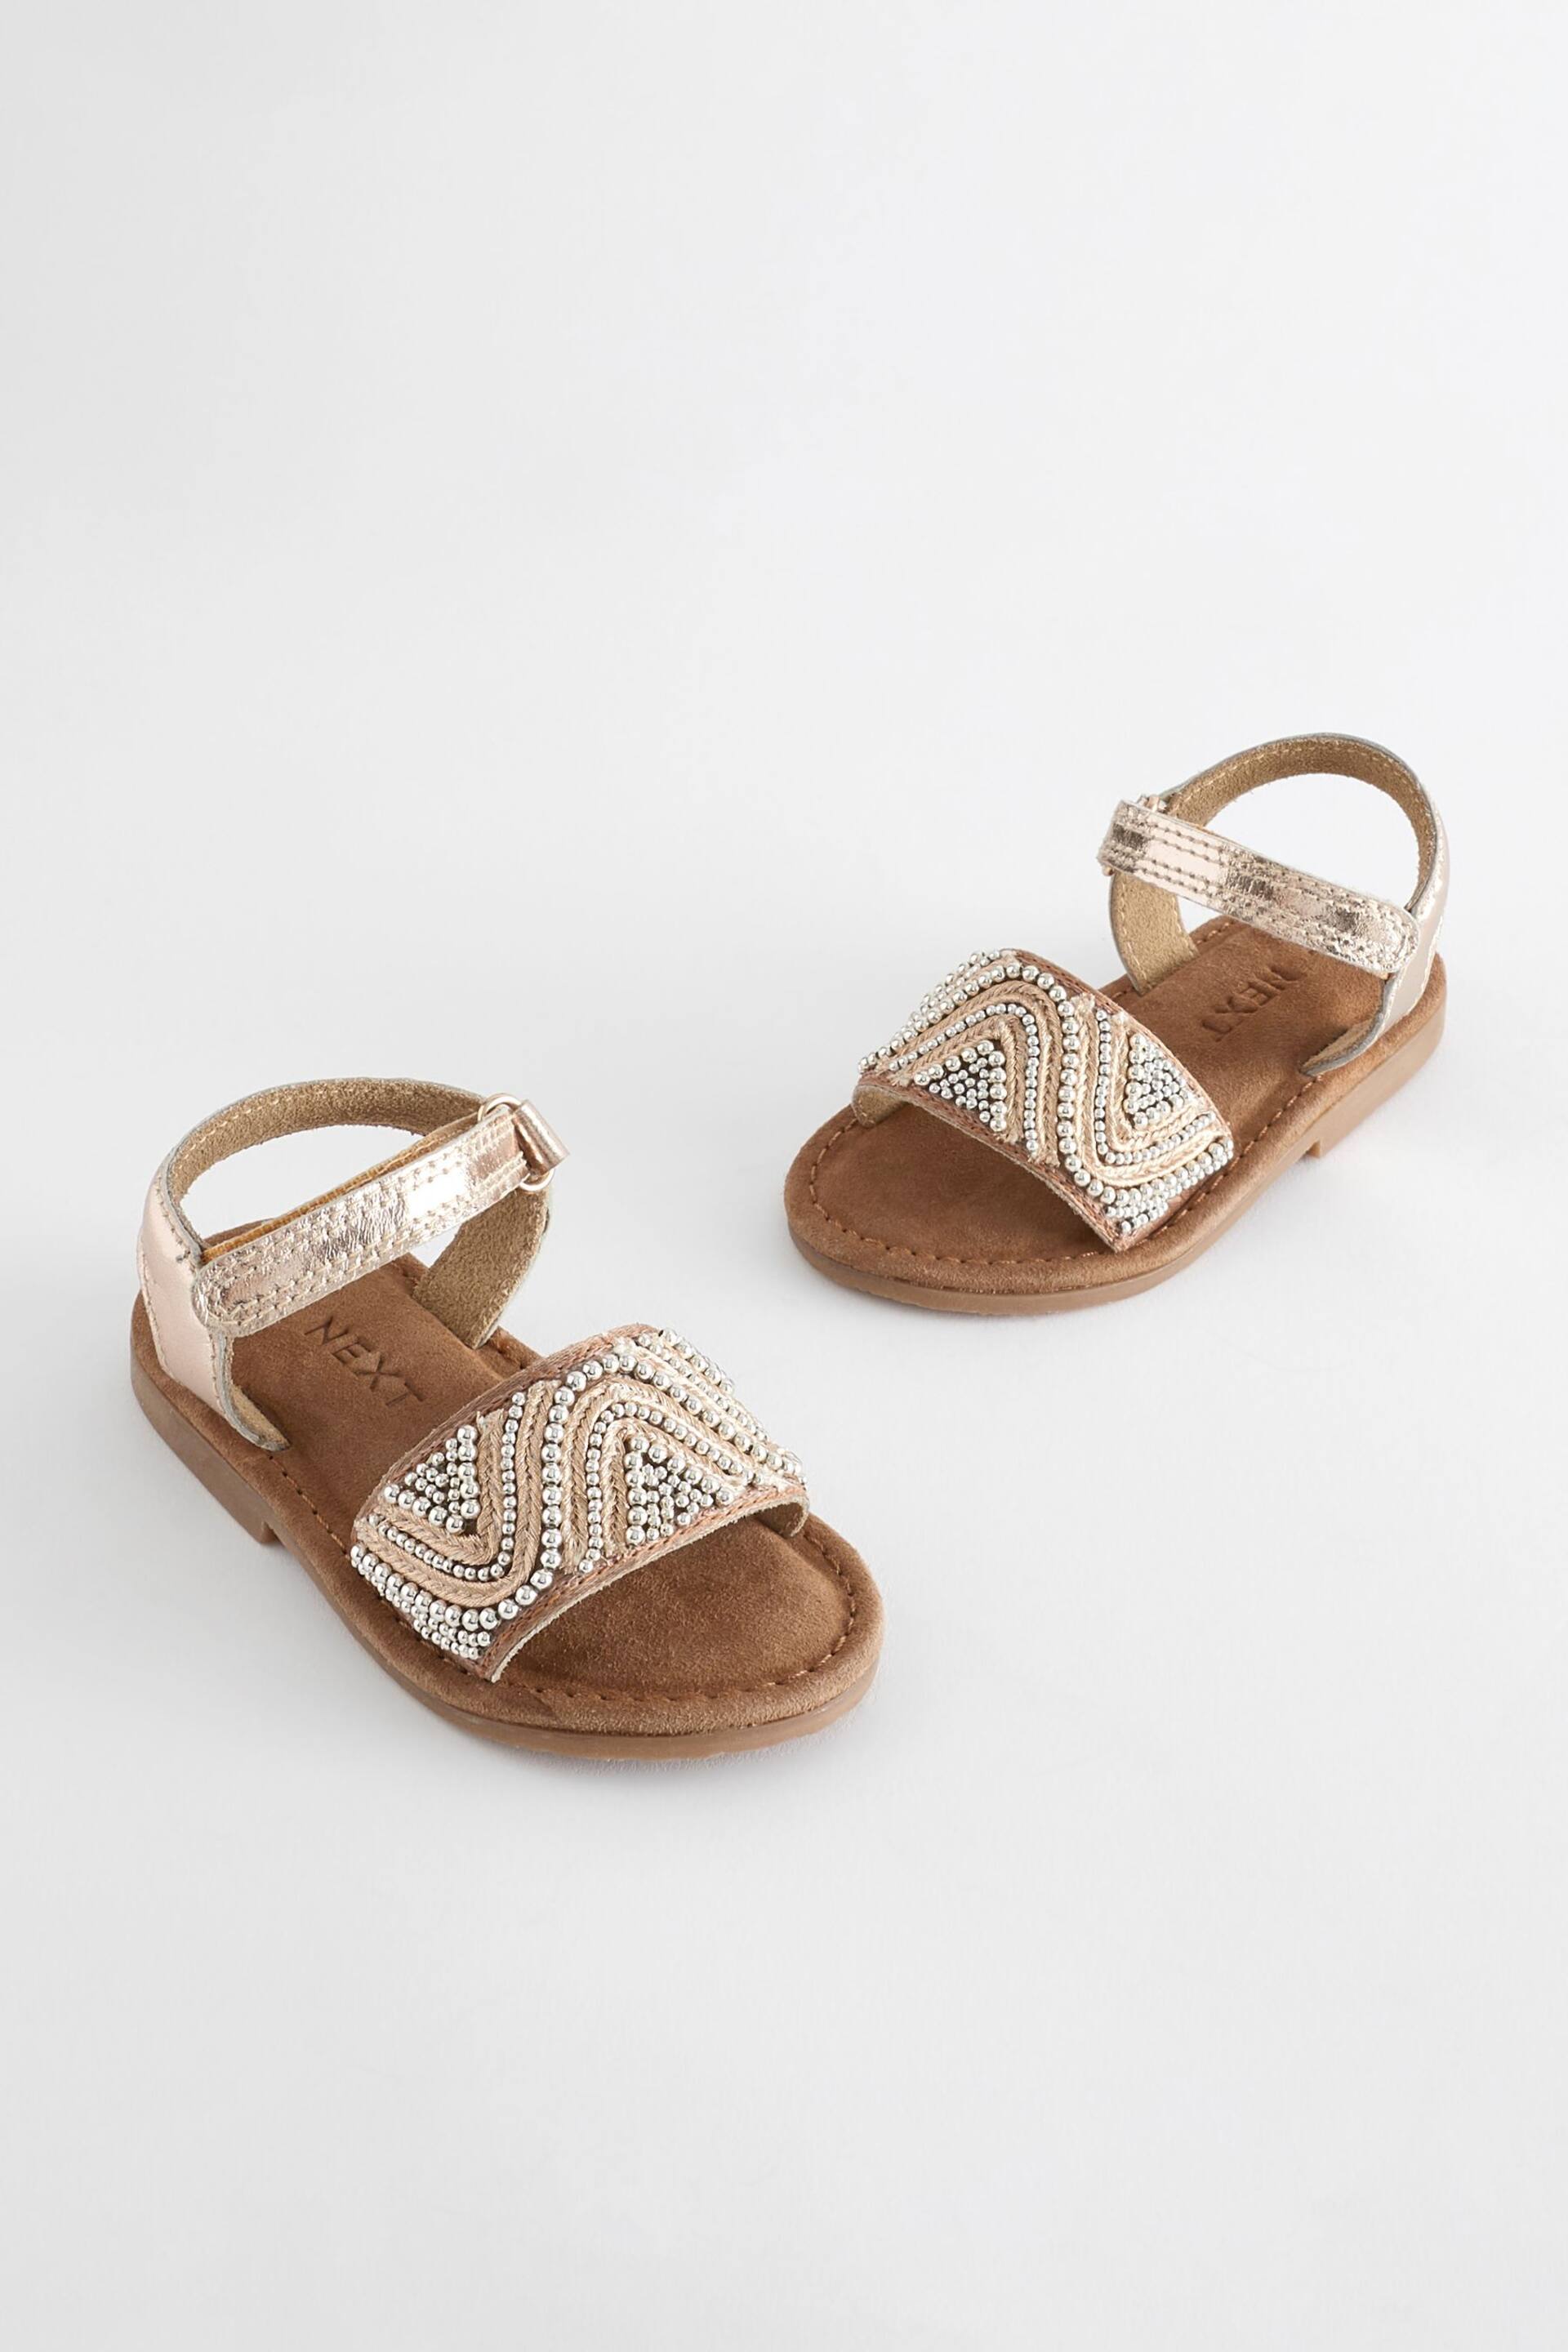 Rose Gold Beaded Occasion Sandals - Image 5 of 10